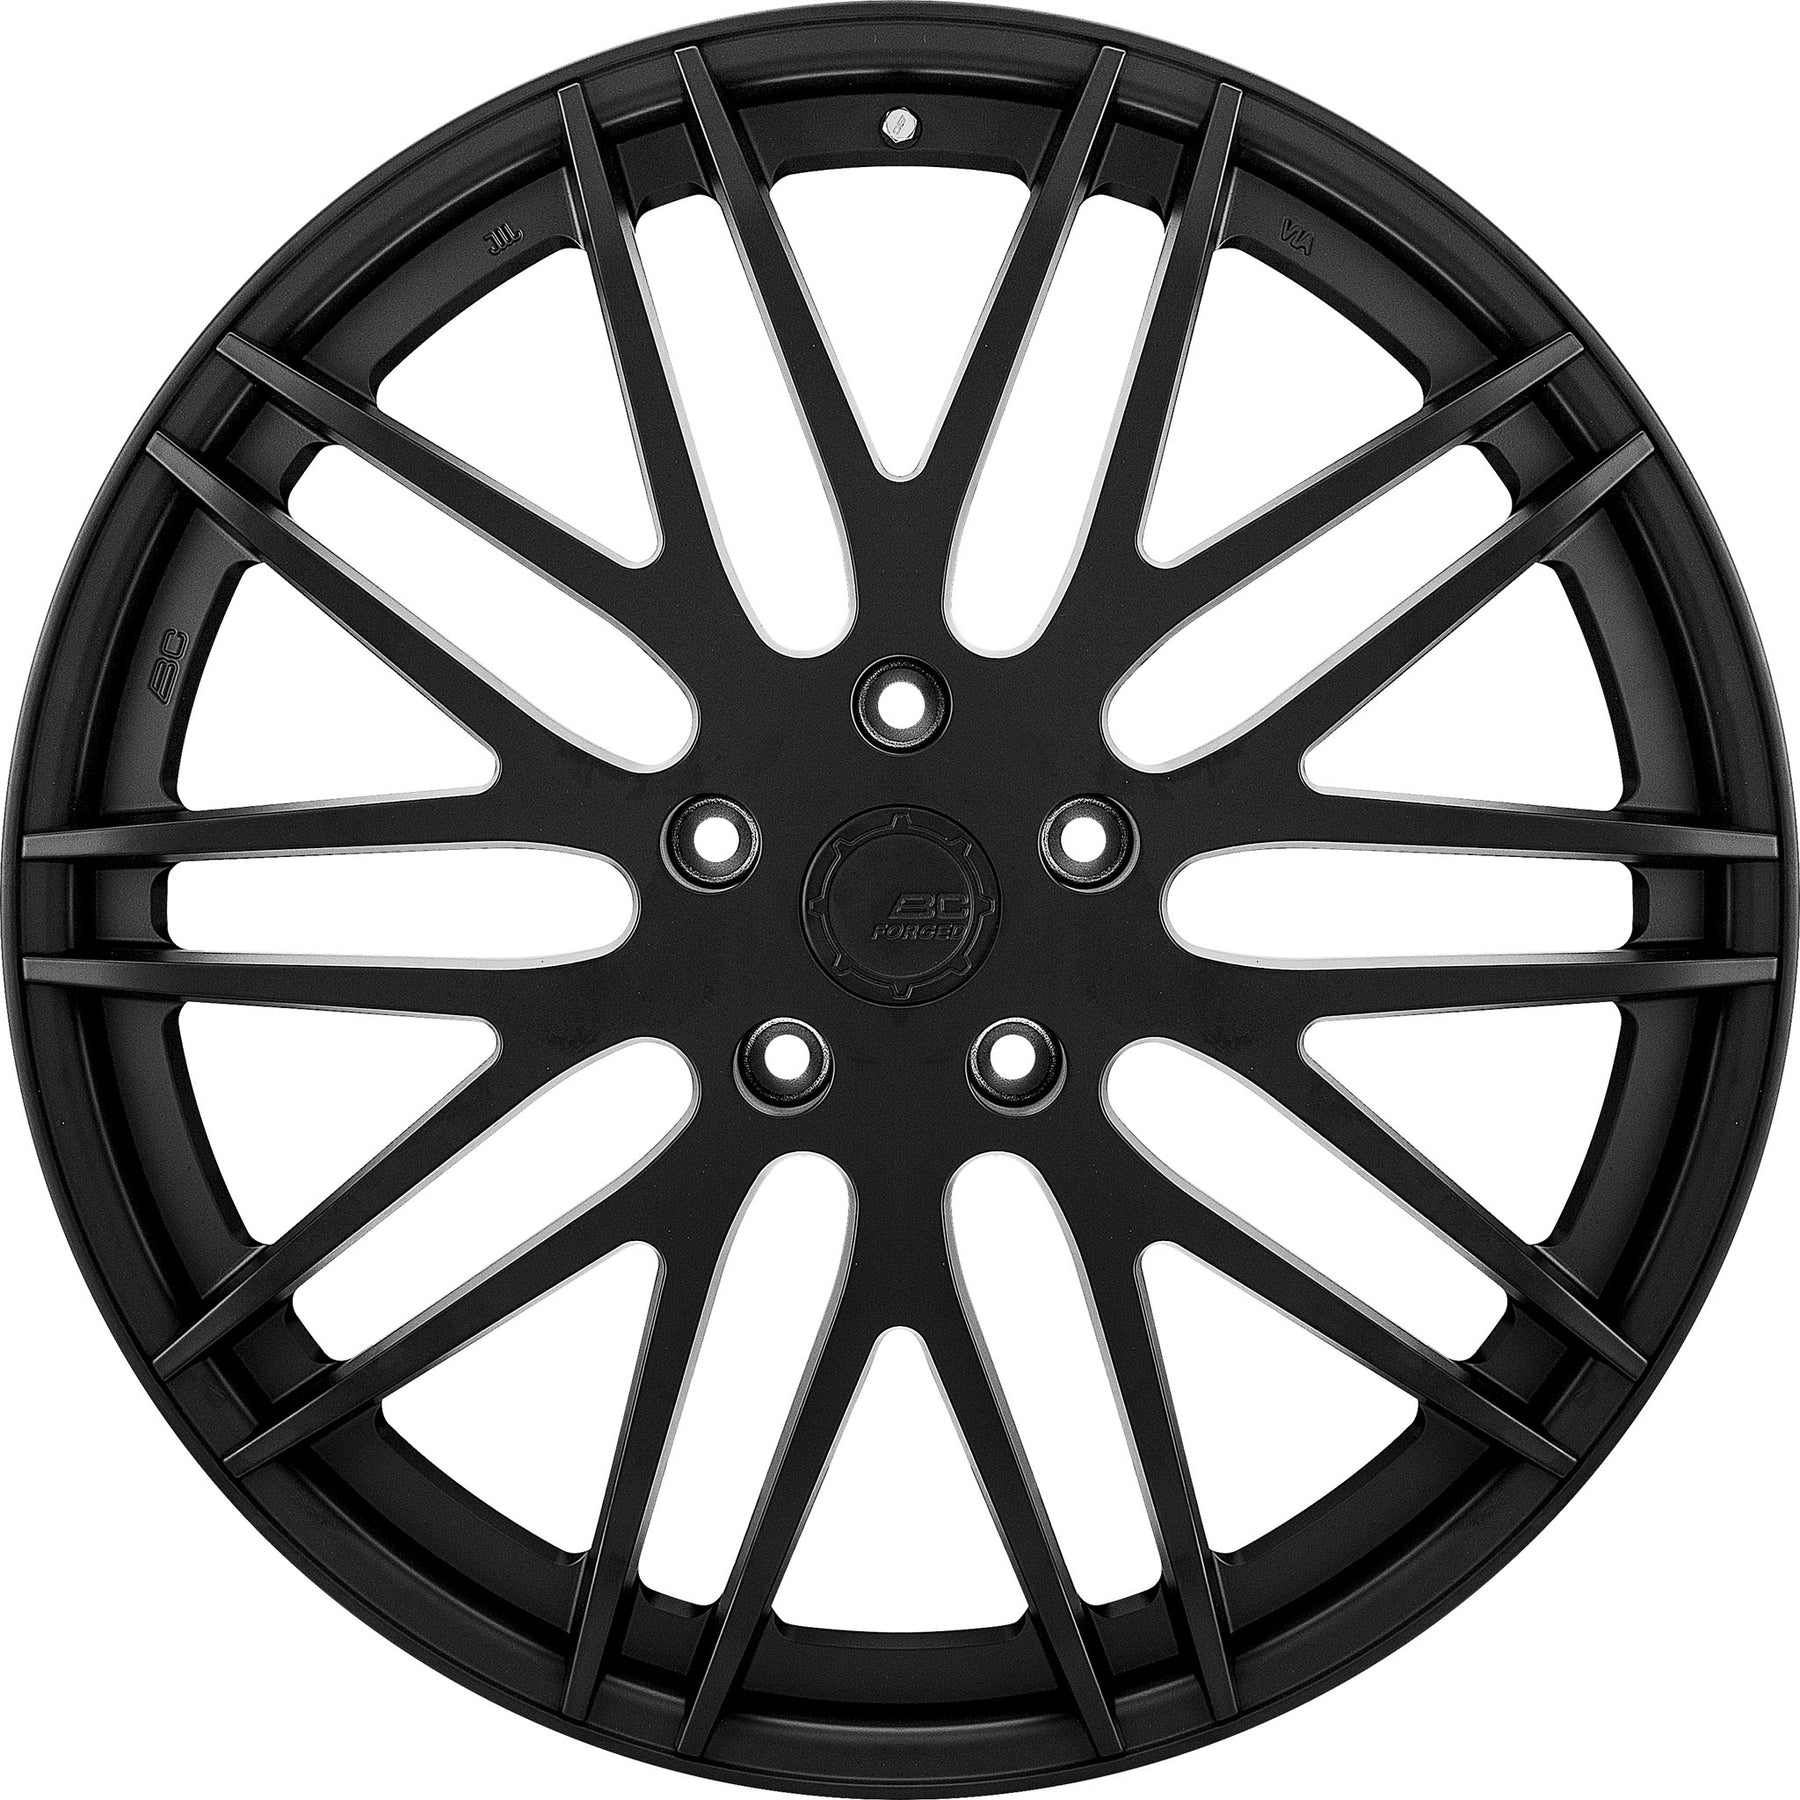 BC Forged NL20